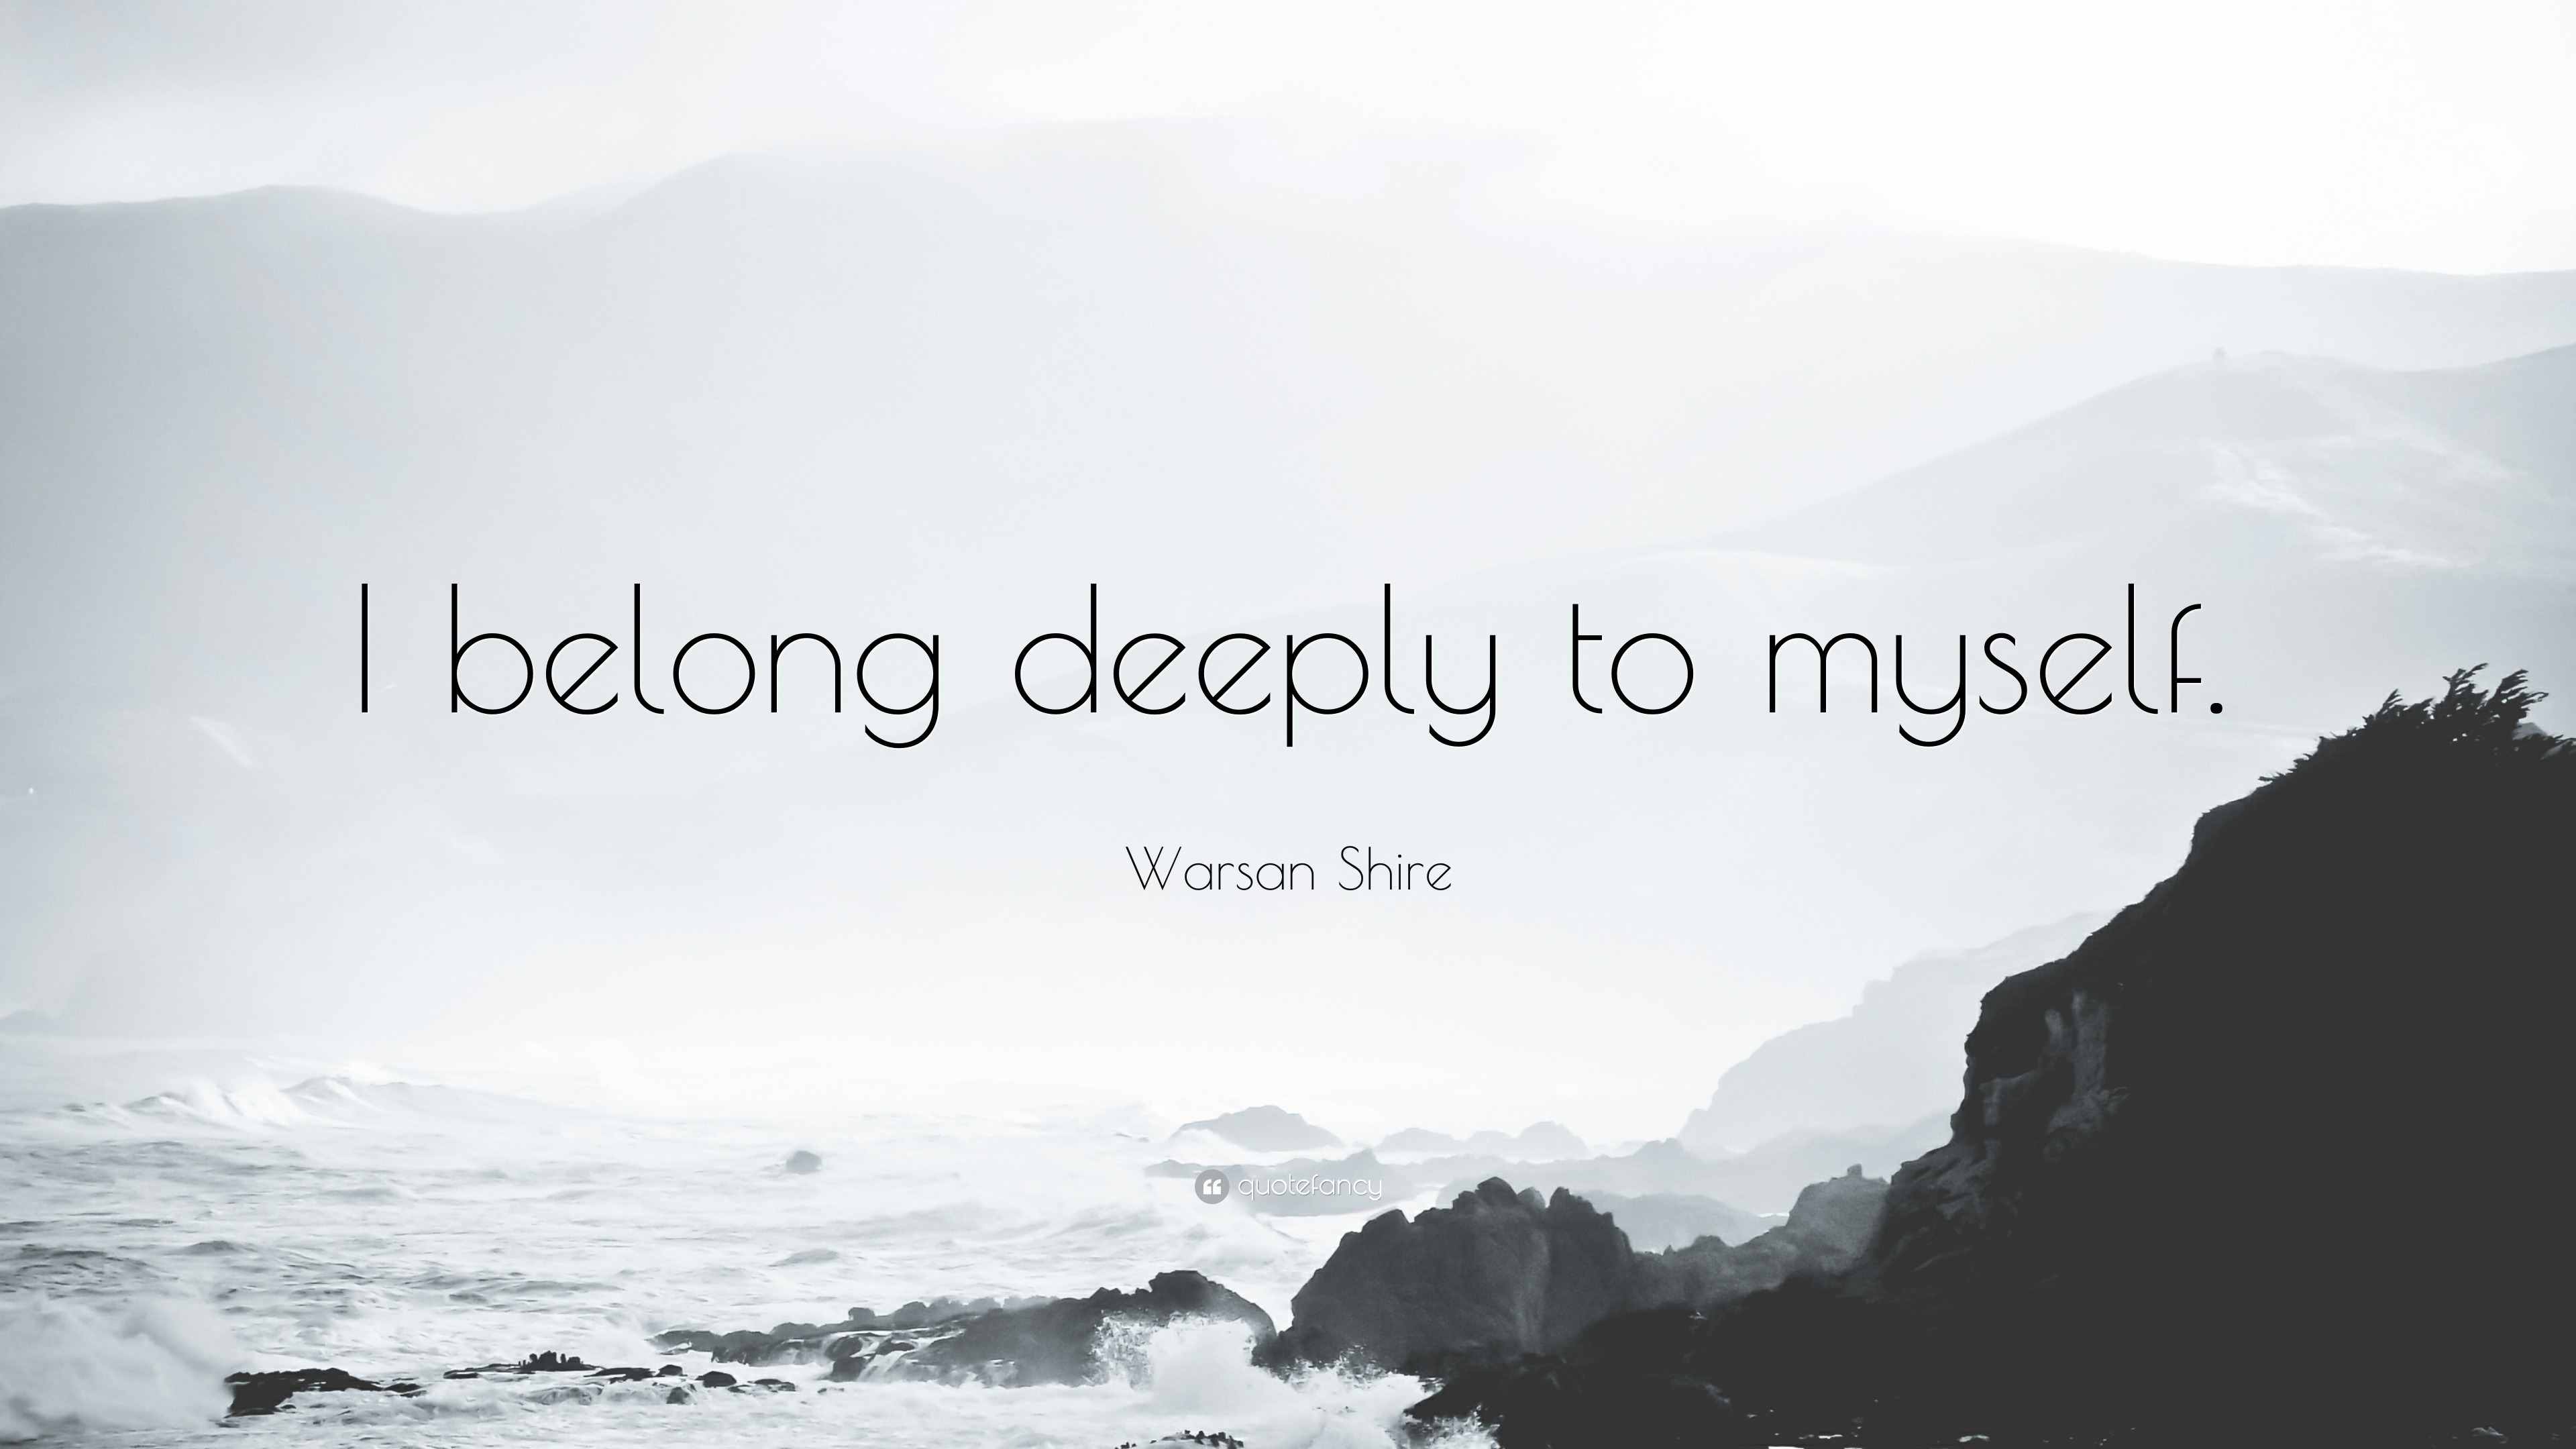 Warsan Shire Quote: “I belong deeply to myself.”